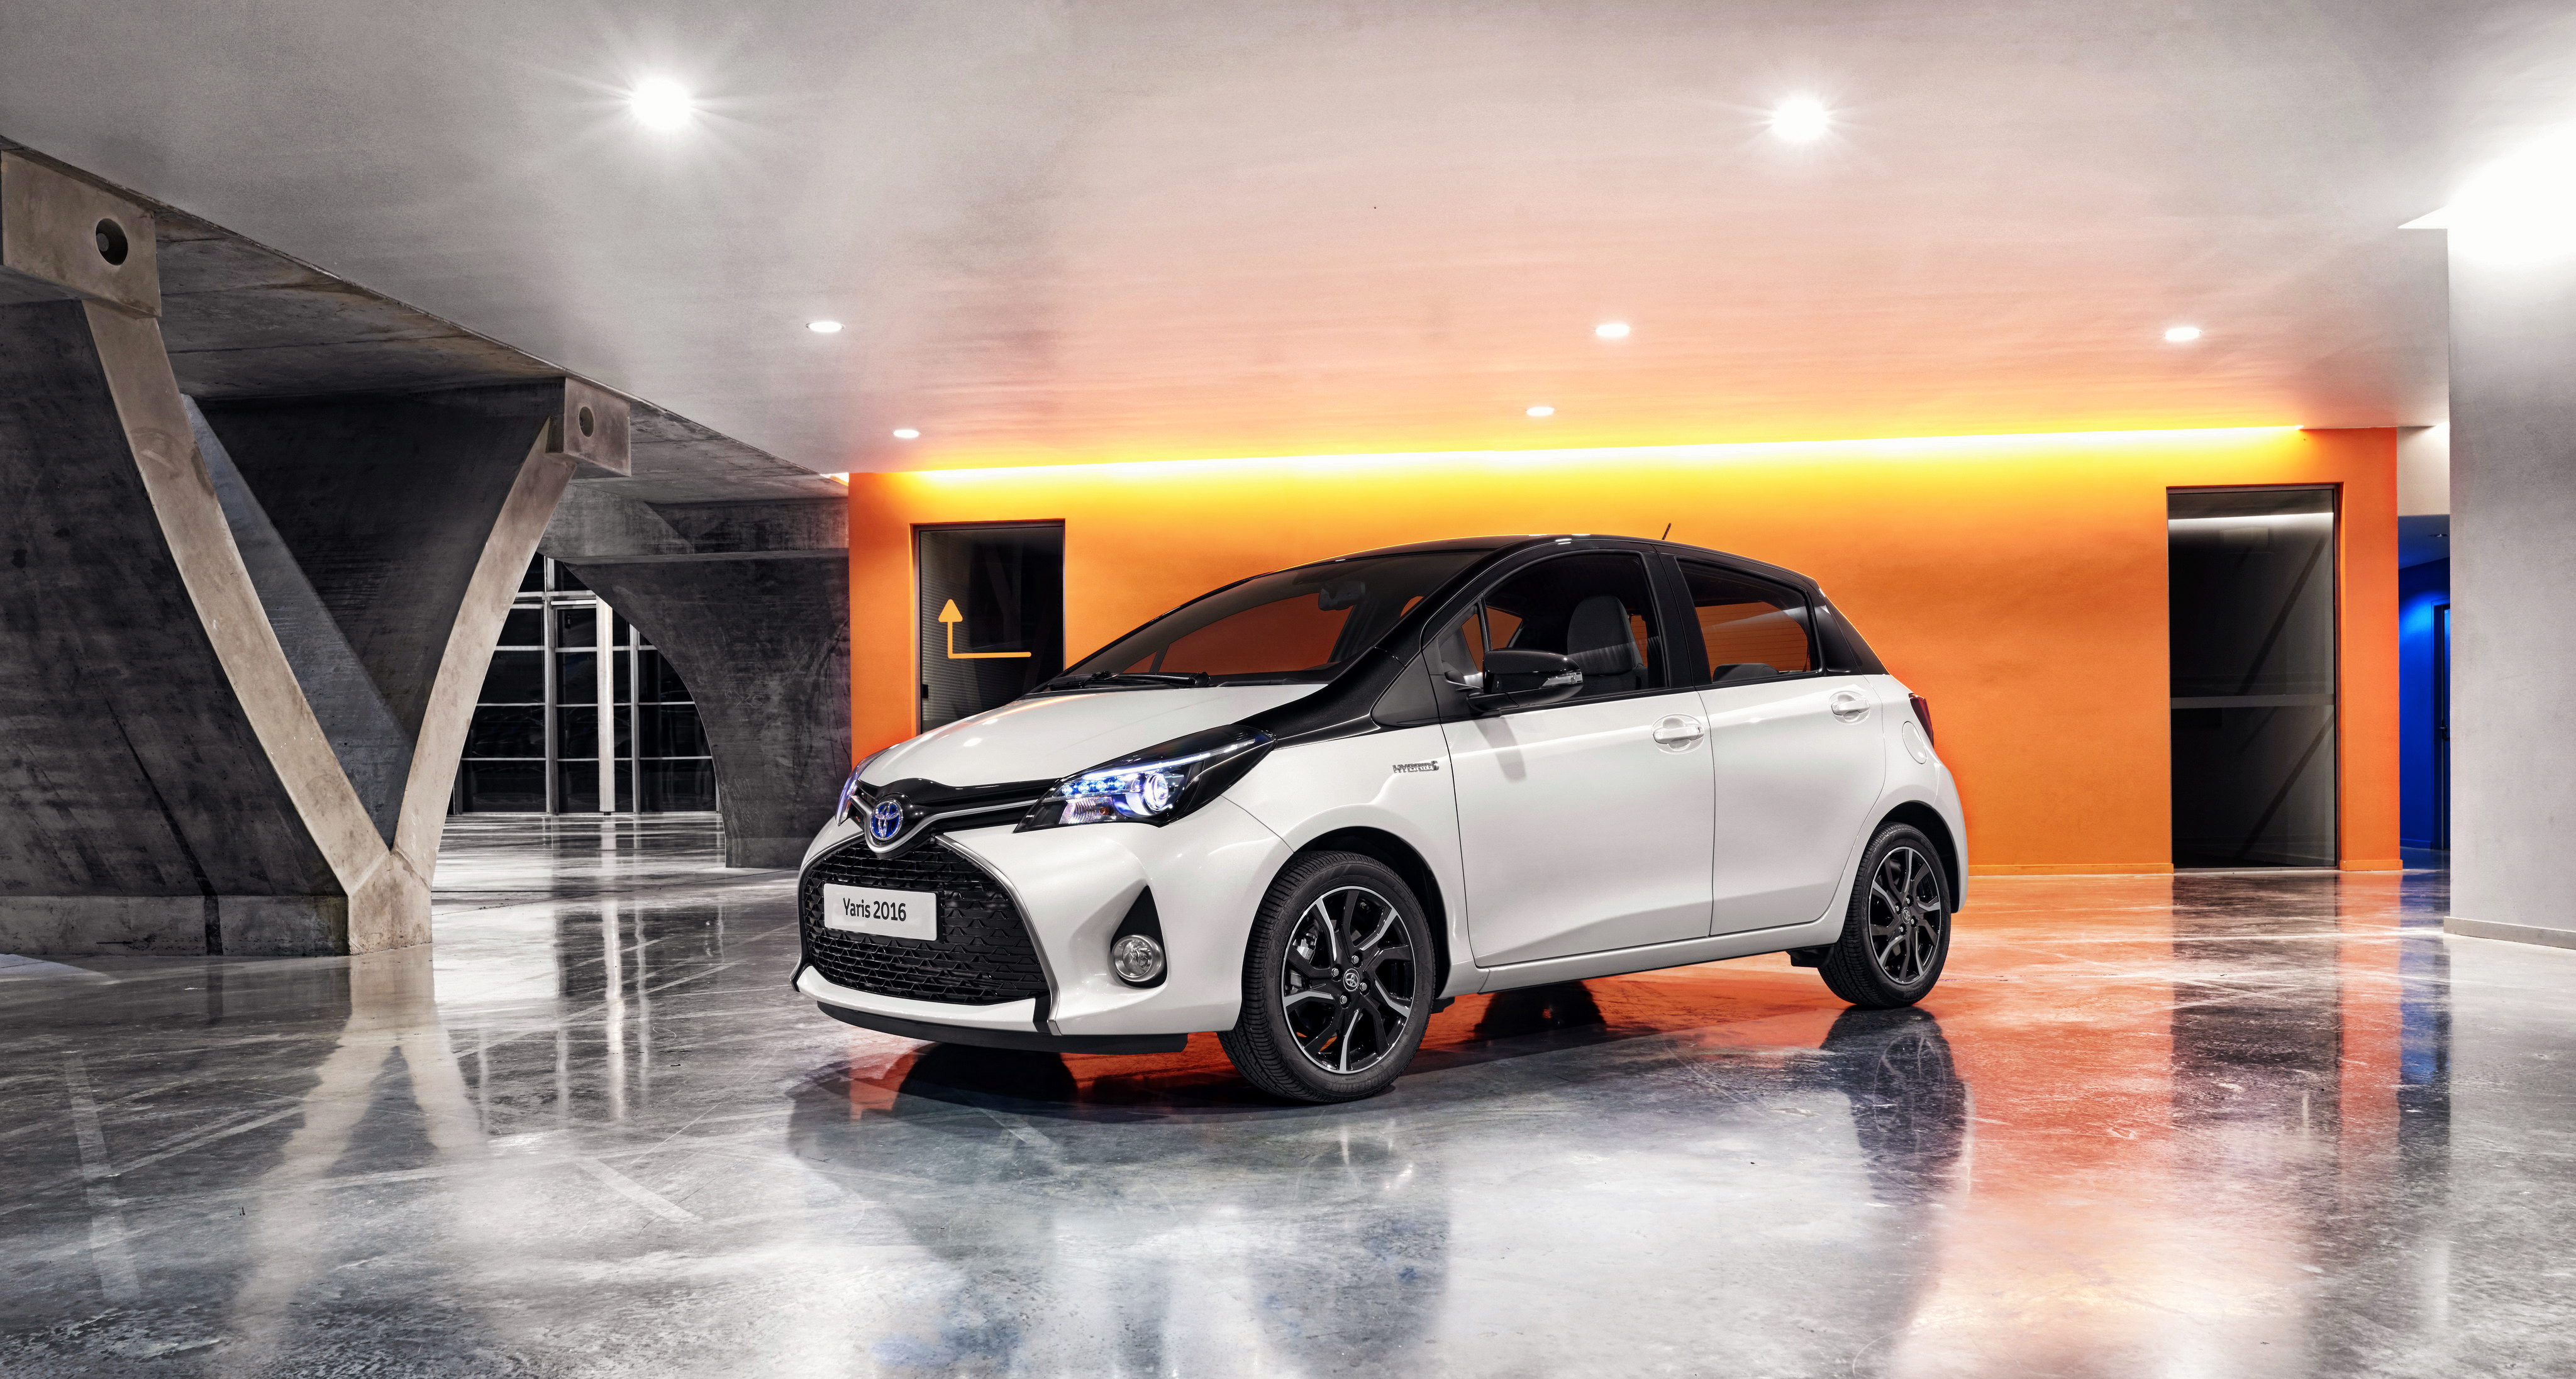 Toyota Yaris Pictures  Download Free Images on Unsplash